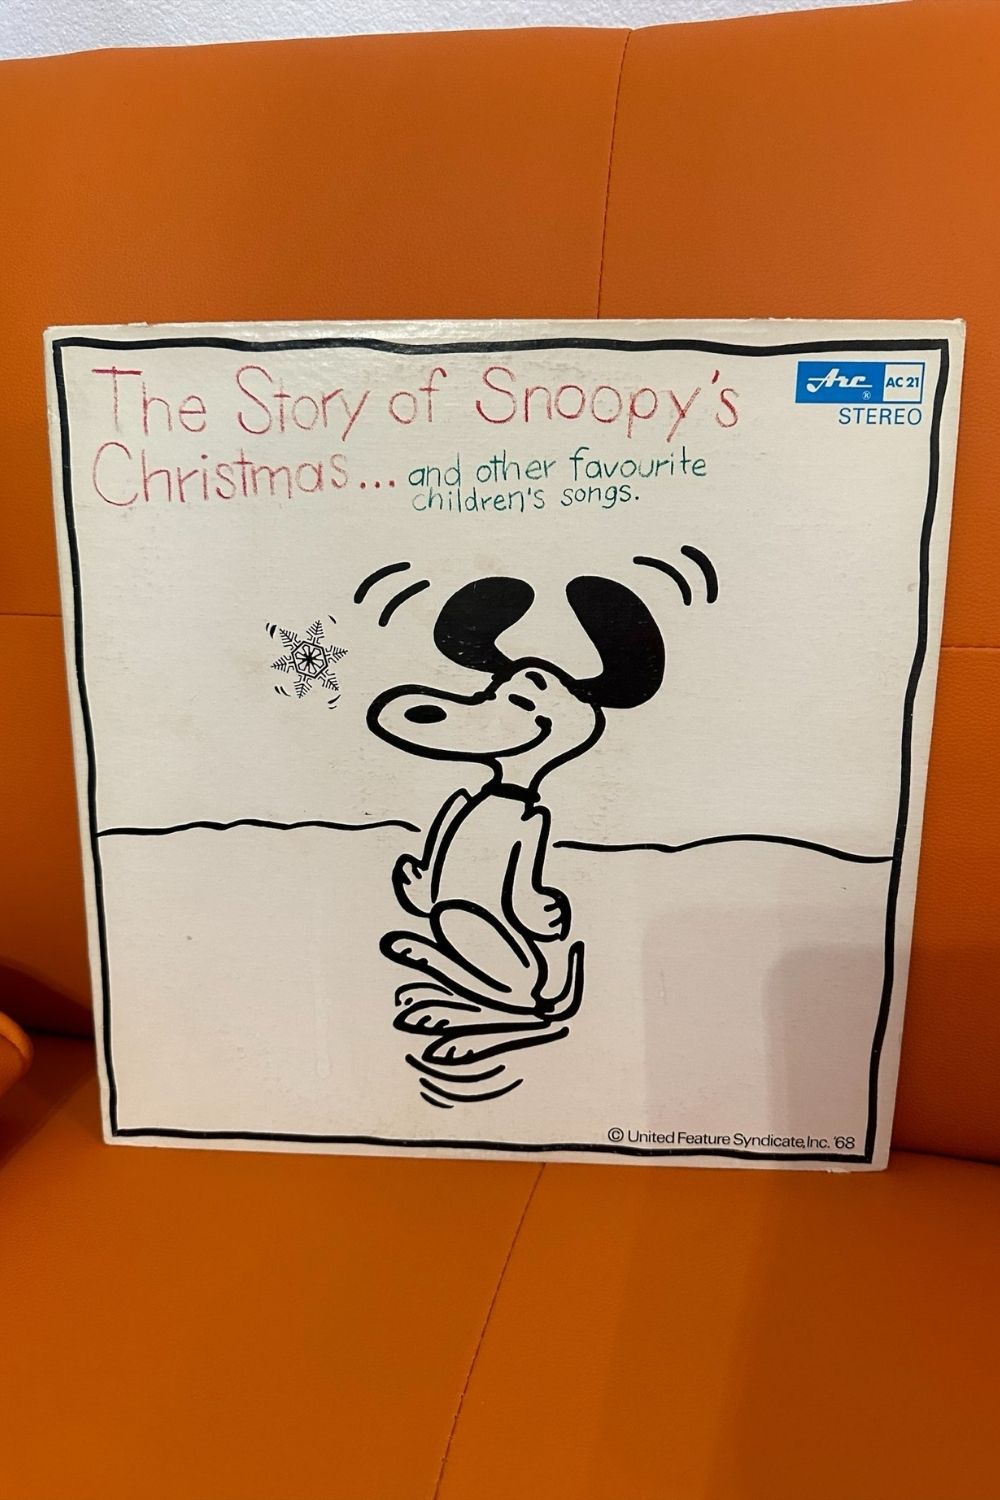 THE STORY OF SNOOPY’S CHRISTMAS VINYL*